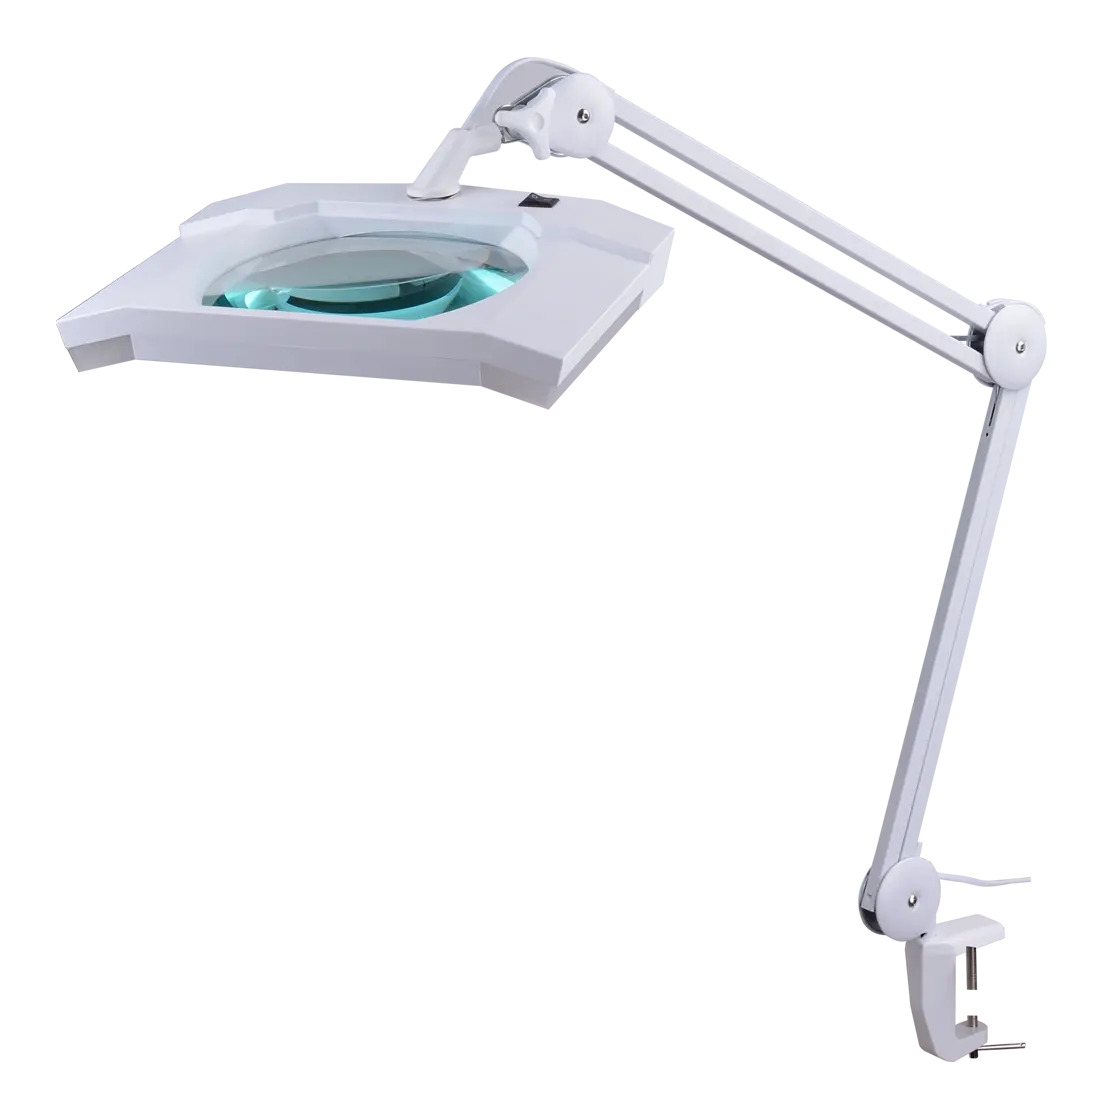 9002LED dimming beauty salon equipment for eyelash extensions magnifying glass lens led lamp for manicure